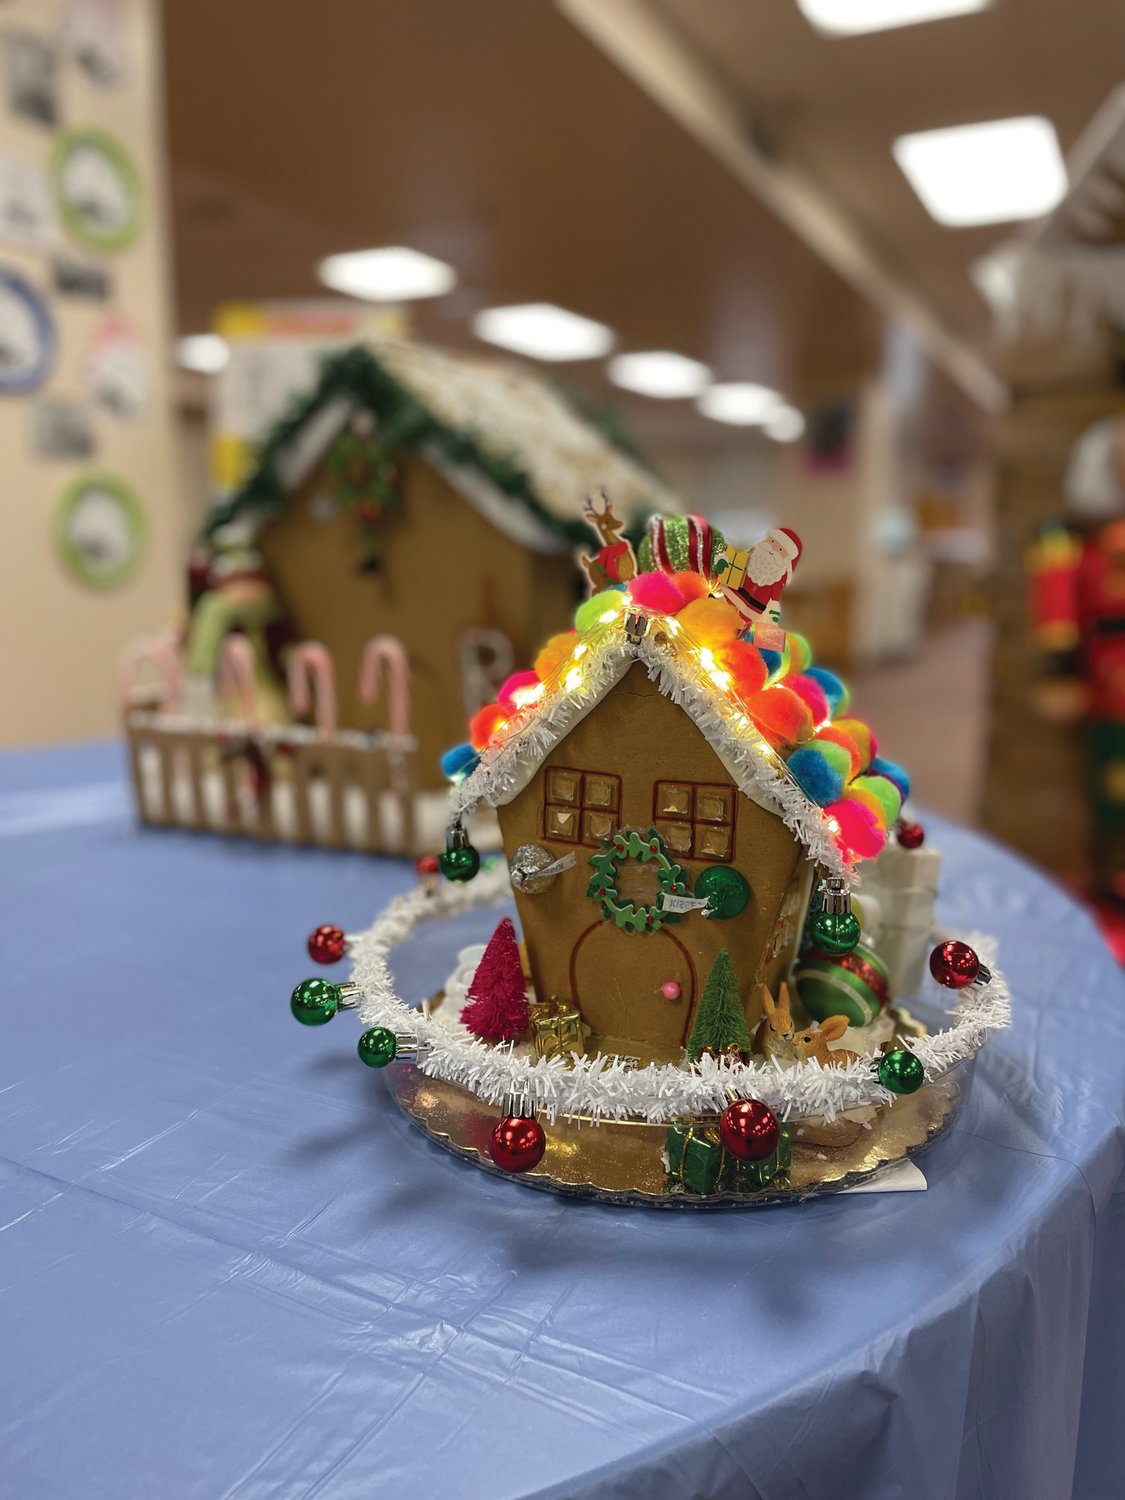 GINGERBREAD STORIES: Ferri students have been asked to build a storybook inspired gingerbread house, using homemade gingerbread, store-bought gingerbread, foam or cardboard for the base. Students can use any kind of materials to decorate the house.